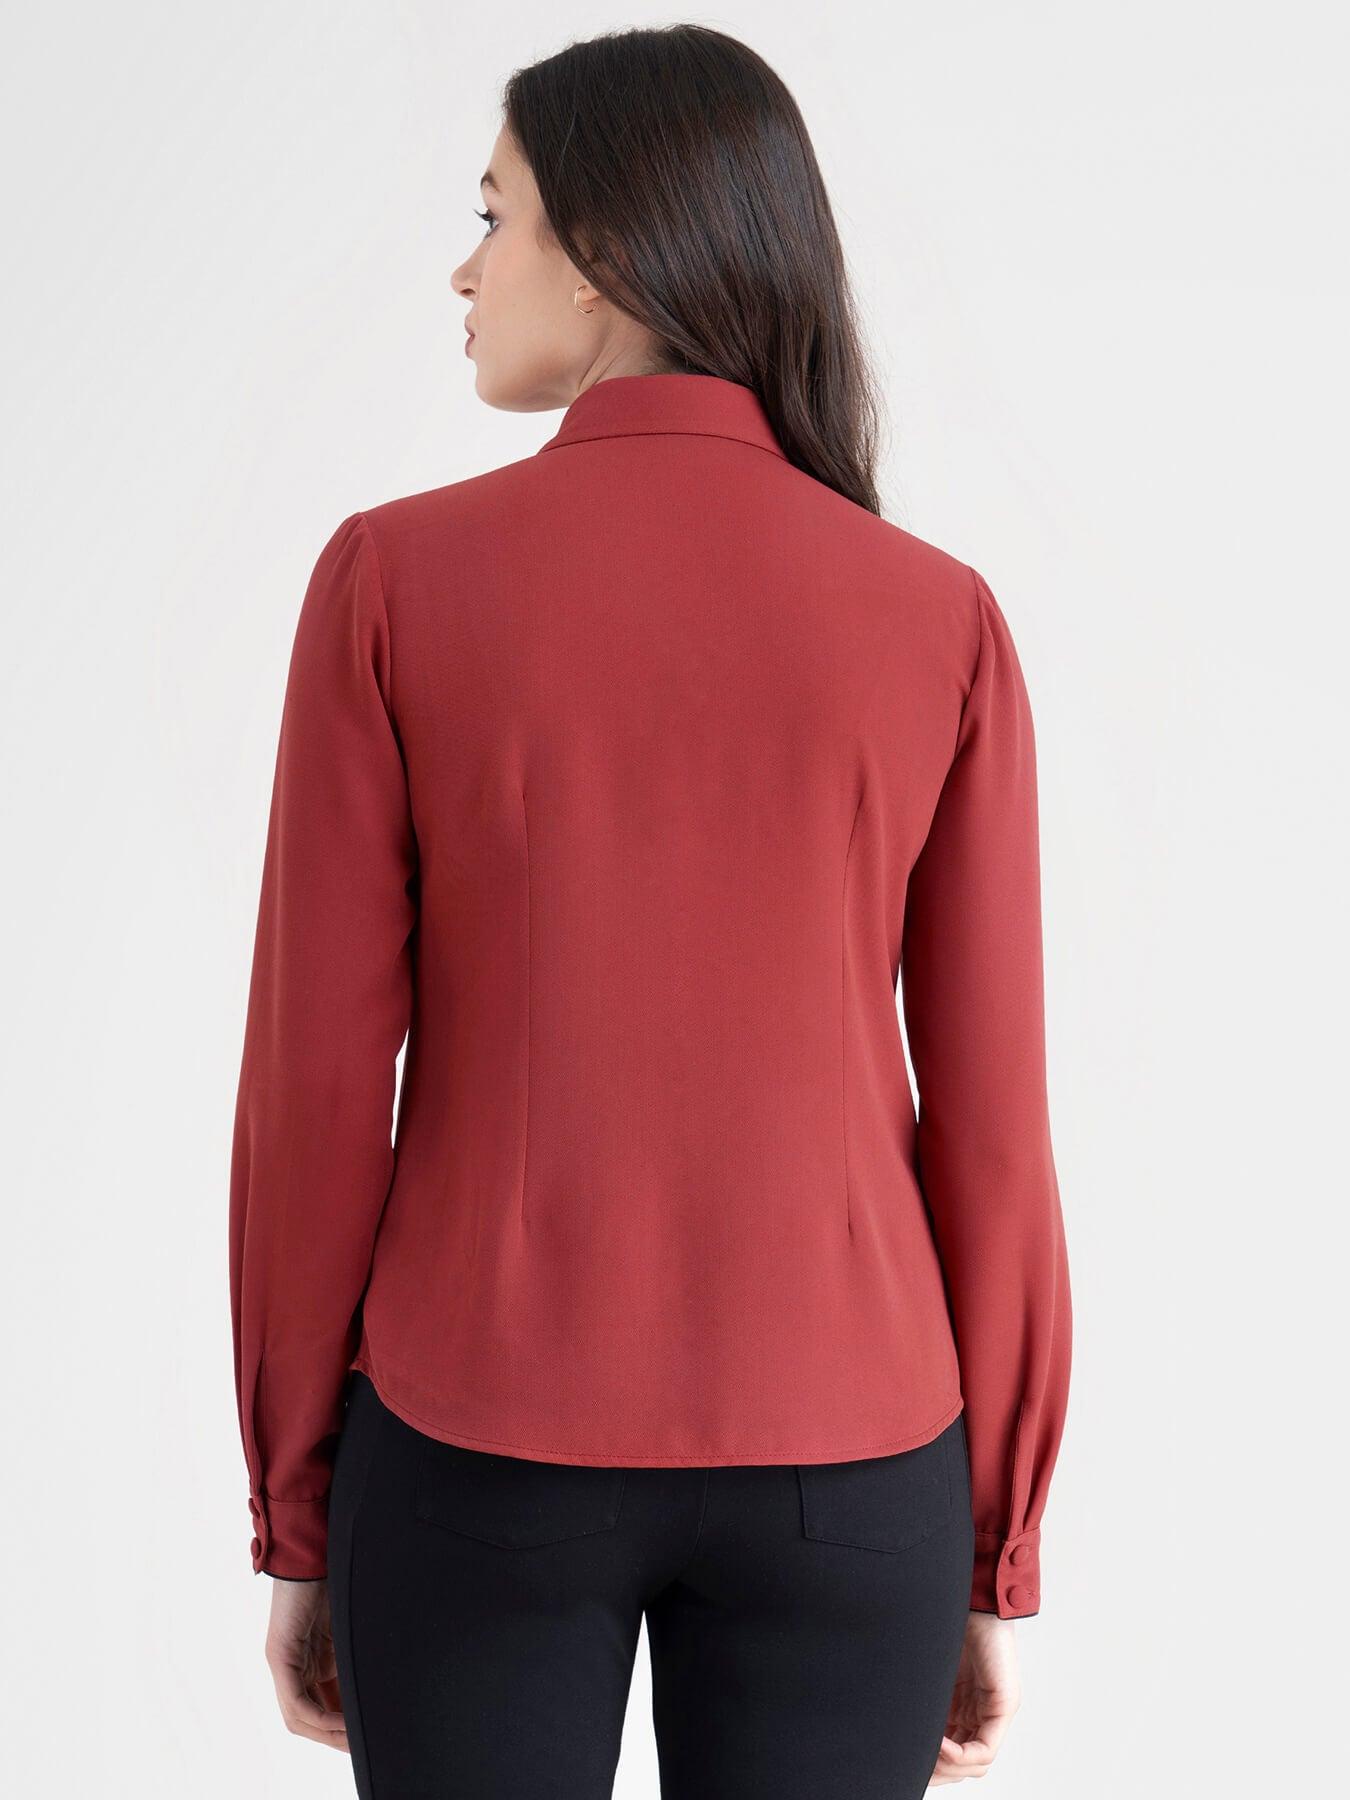 Georgette Collared Shirt - Red| Formal Shirts